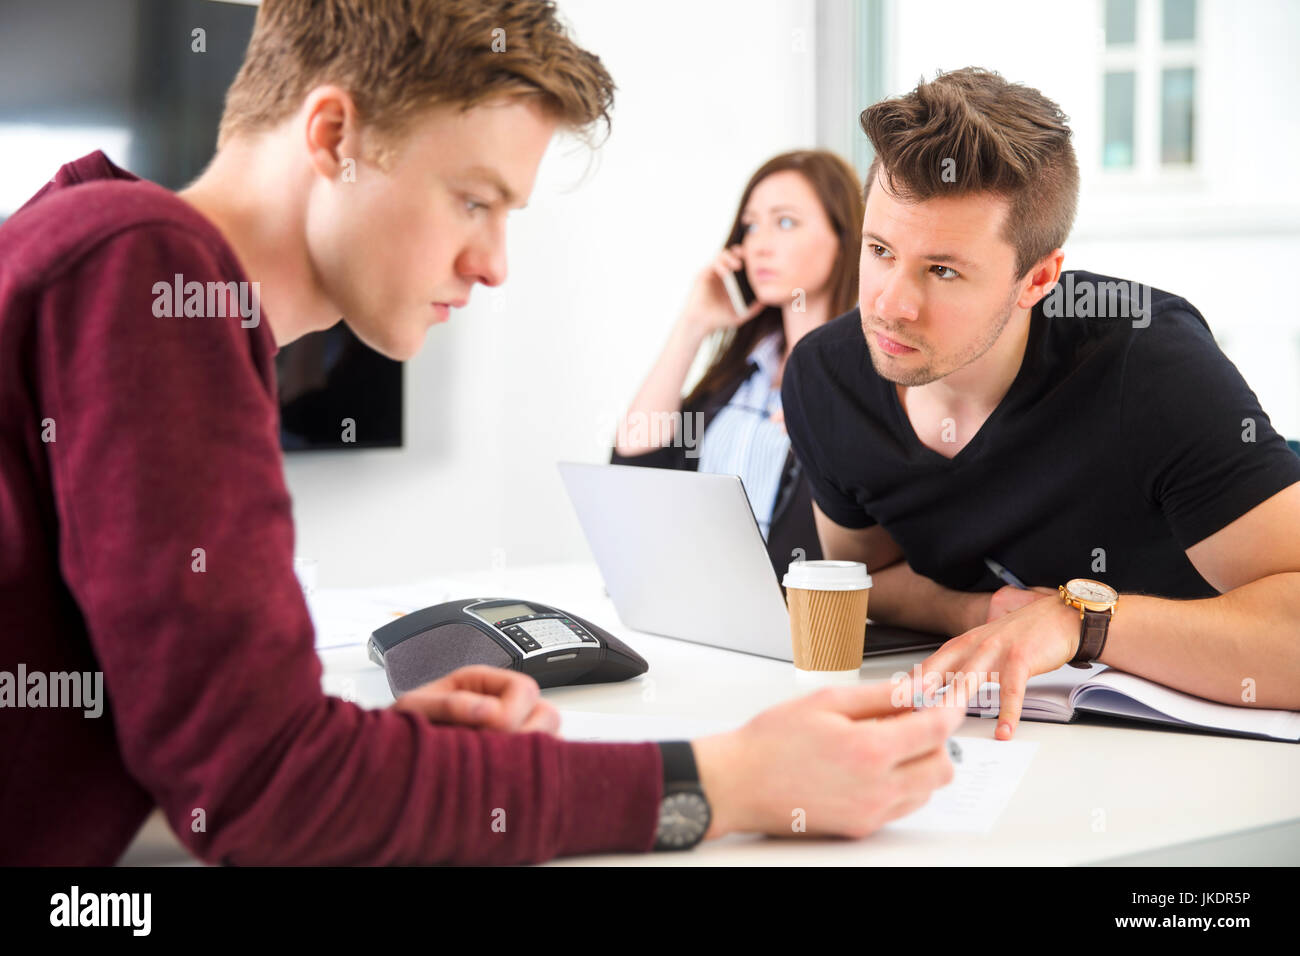 Businessmen Communicating While Colleague Using Smart Phone Stock Photo